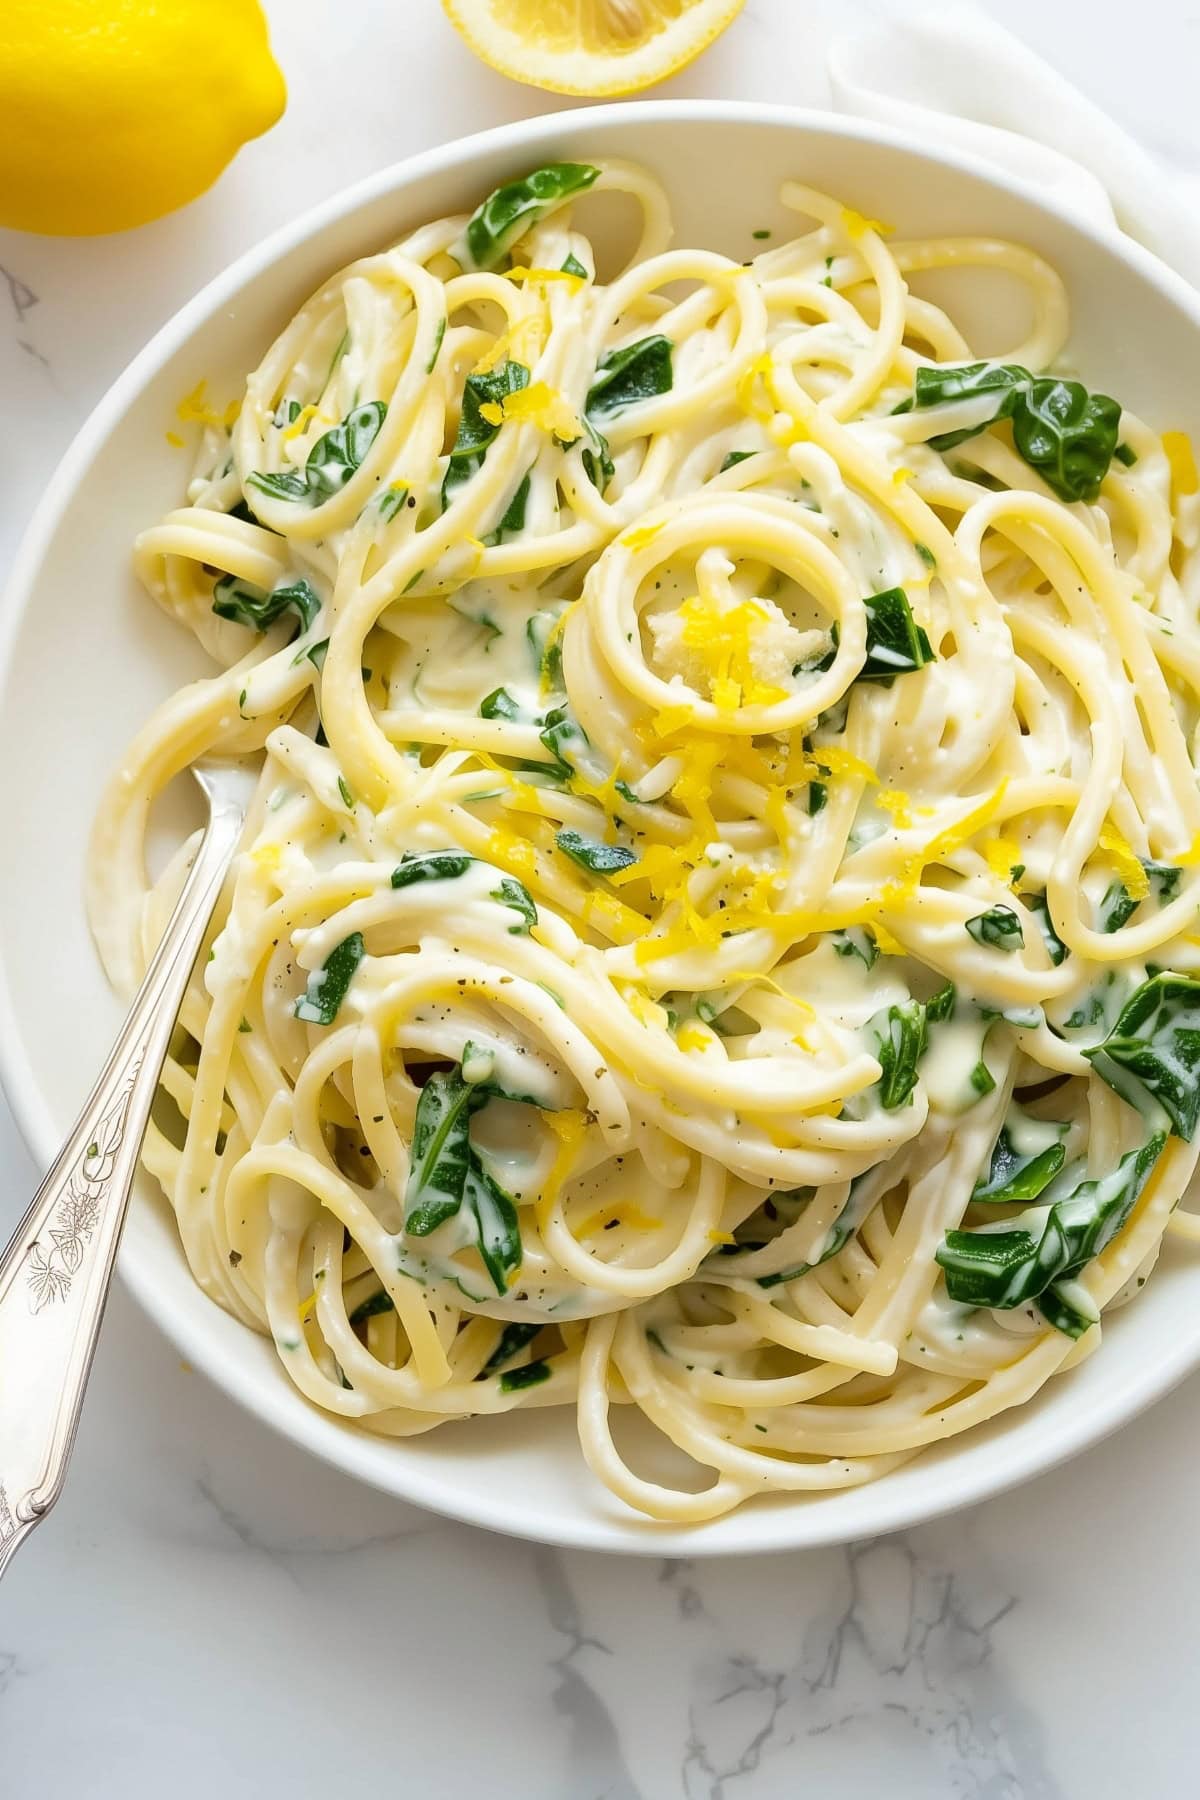 Savory lemon ricotta pasta with baby spinach and lemon zest in a white bowl with a fork